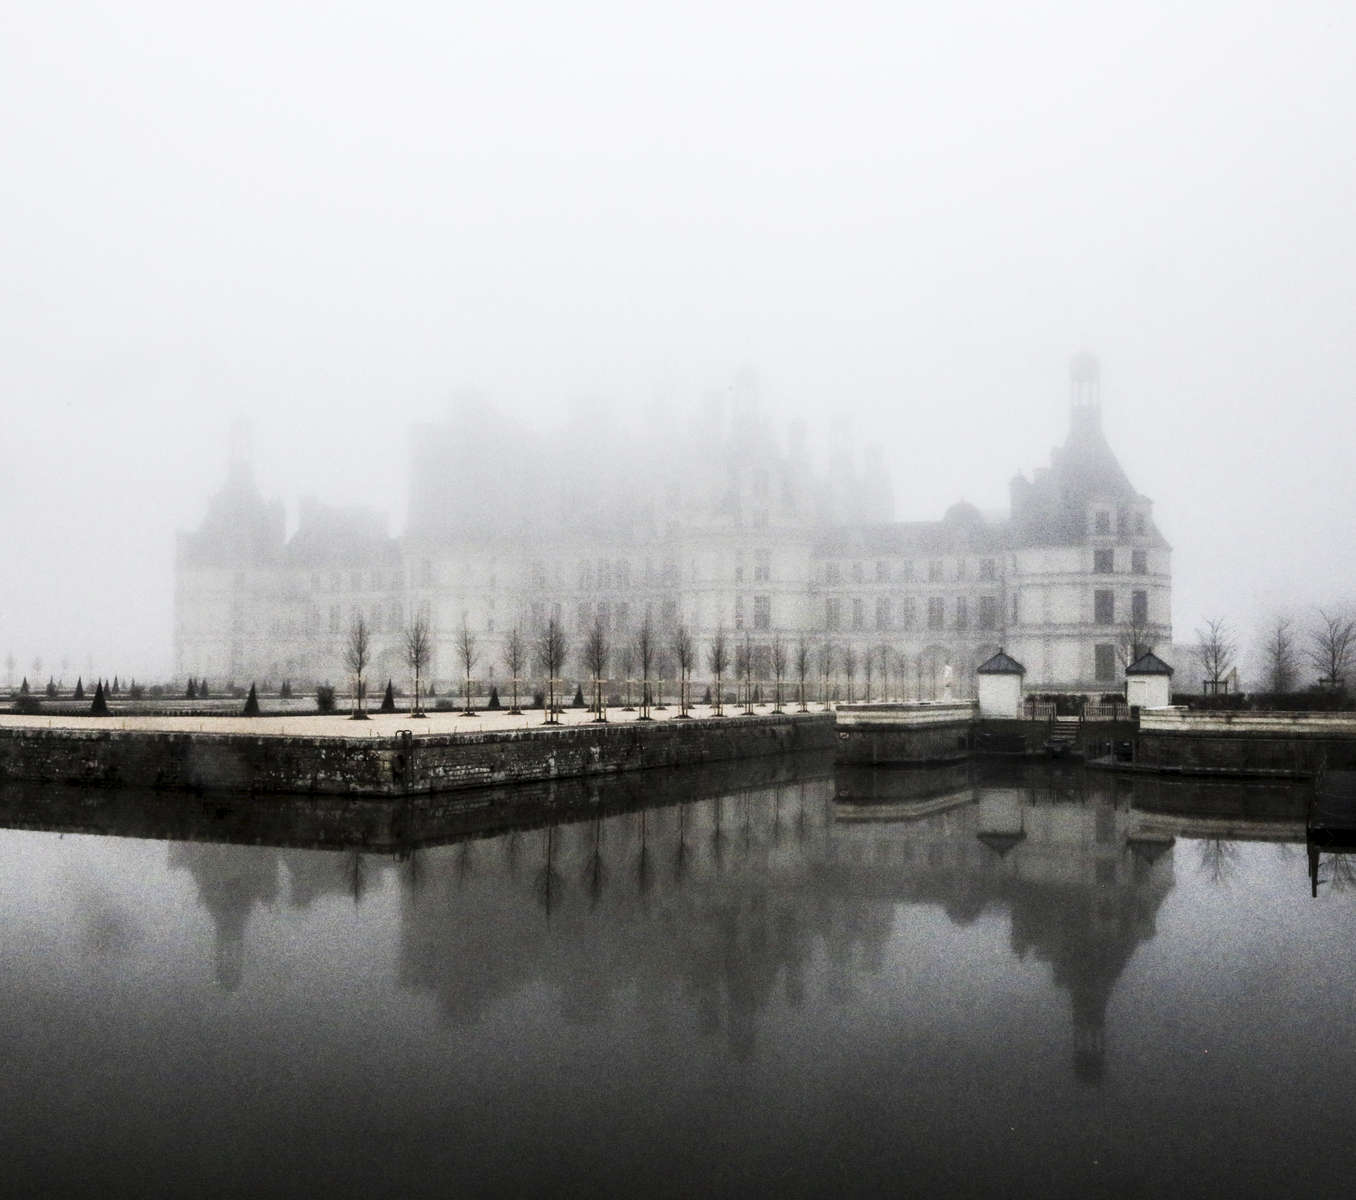 The castle of Chambord in the mist.